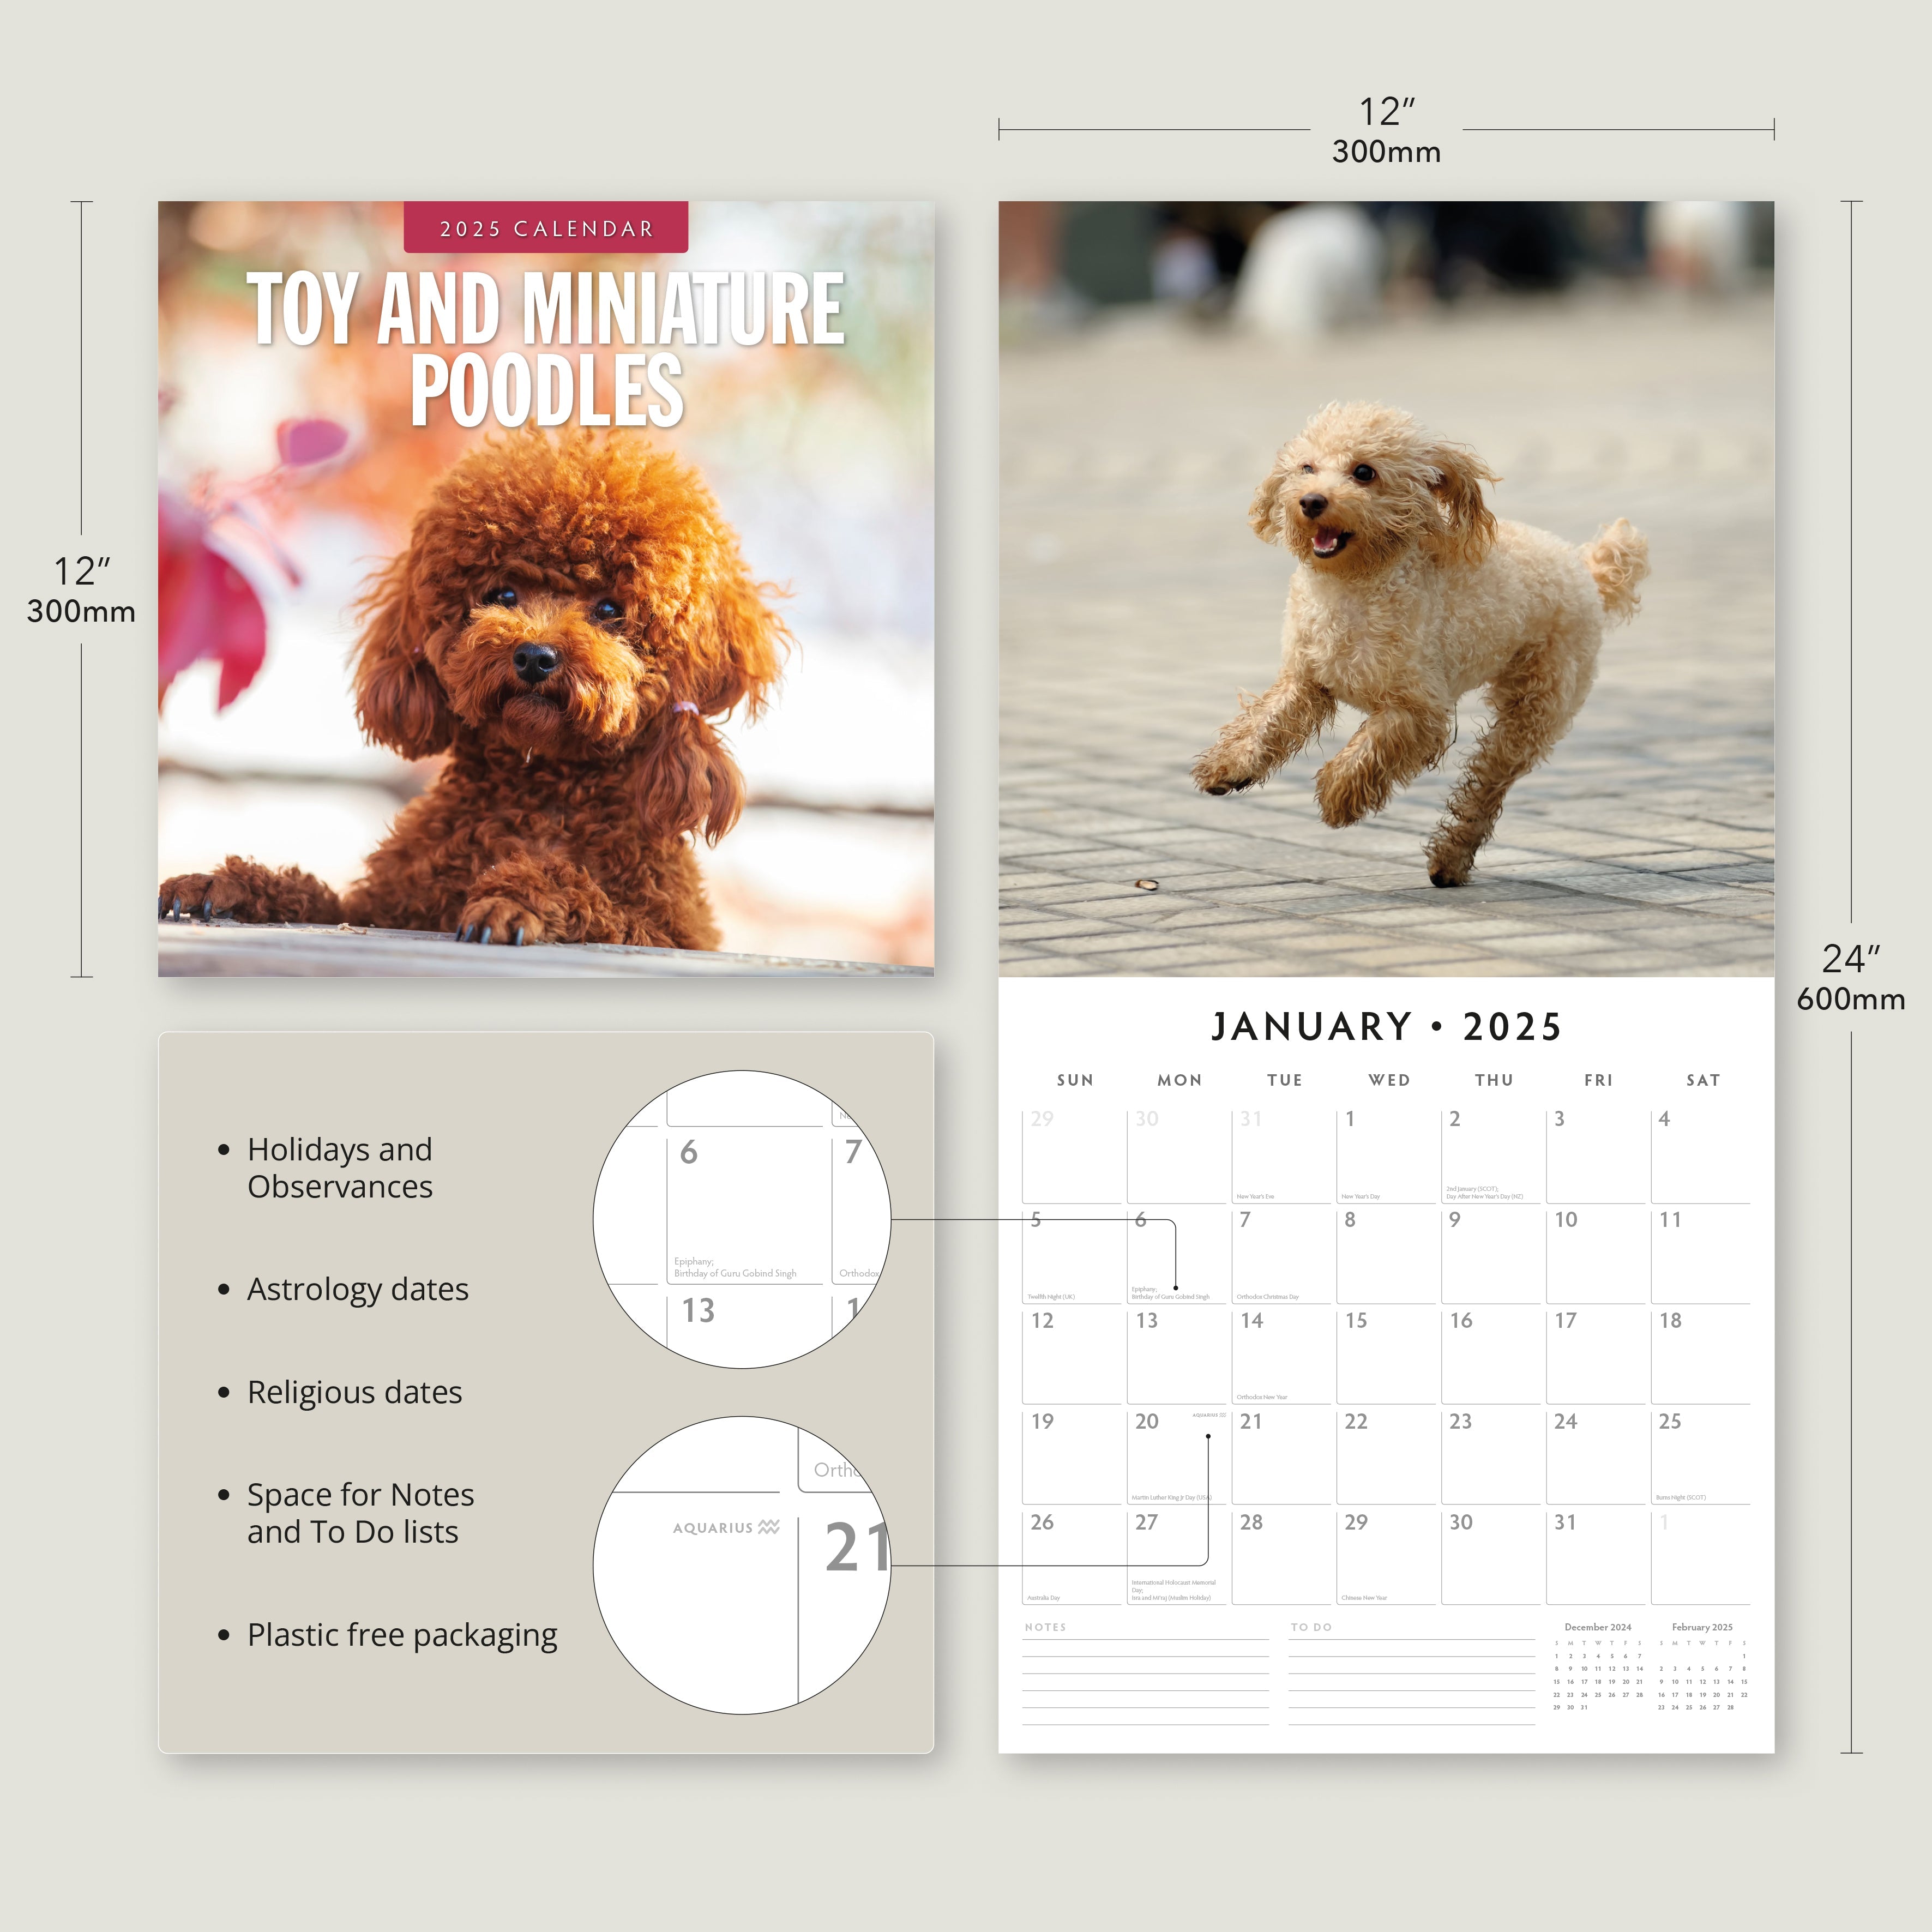 2025 Toy and Miniature Poodles - Square Wall Calendar